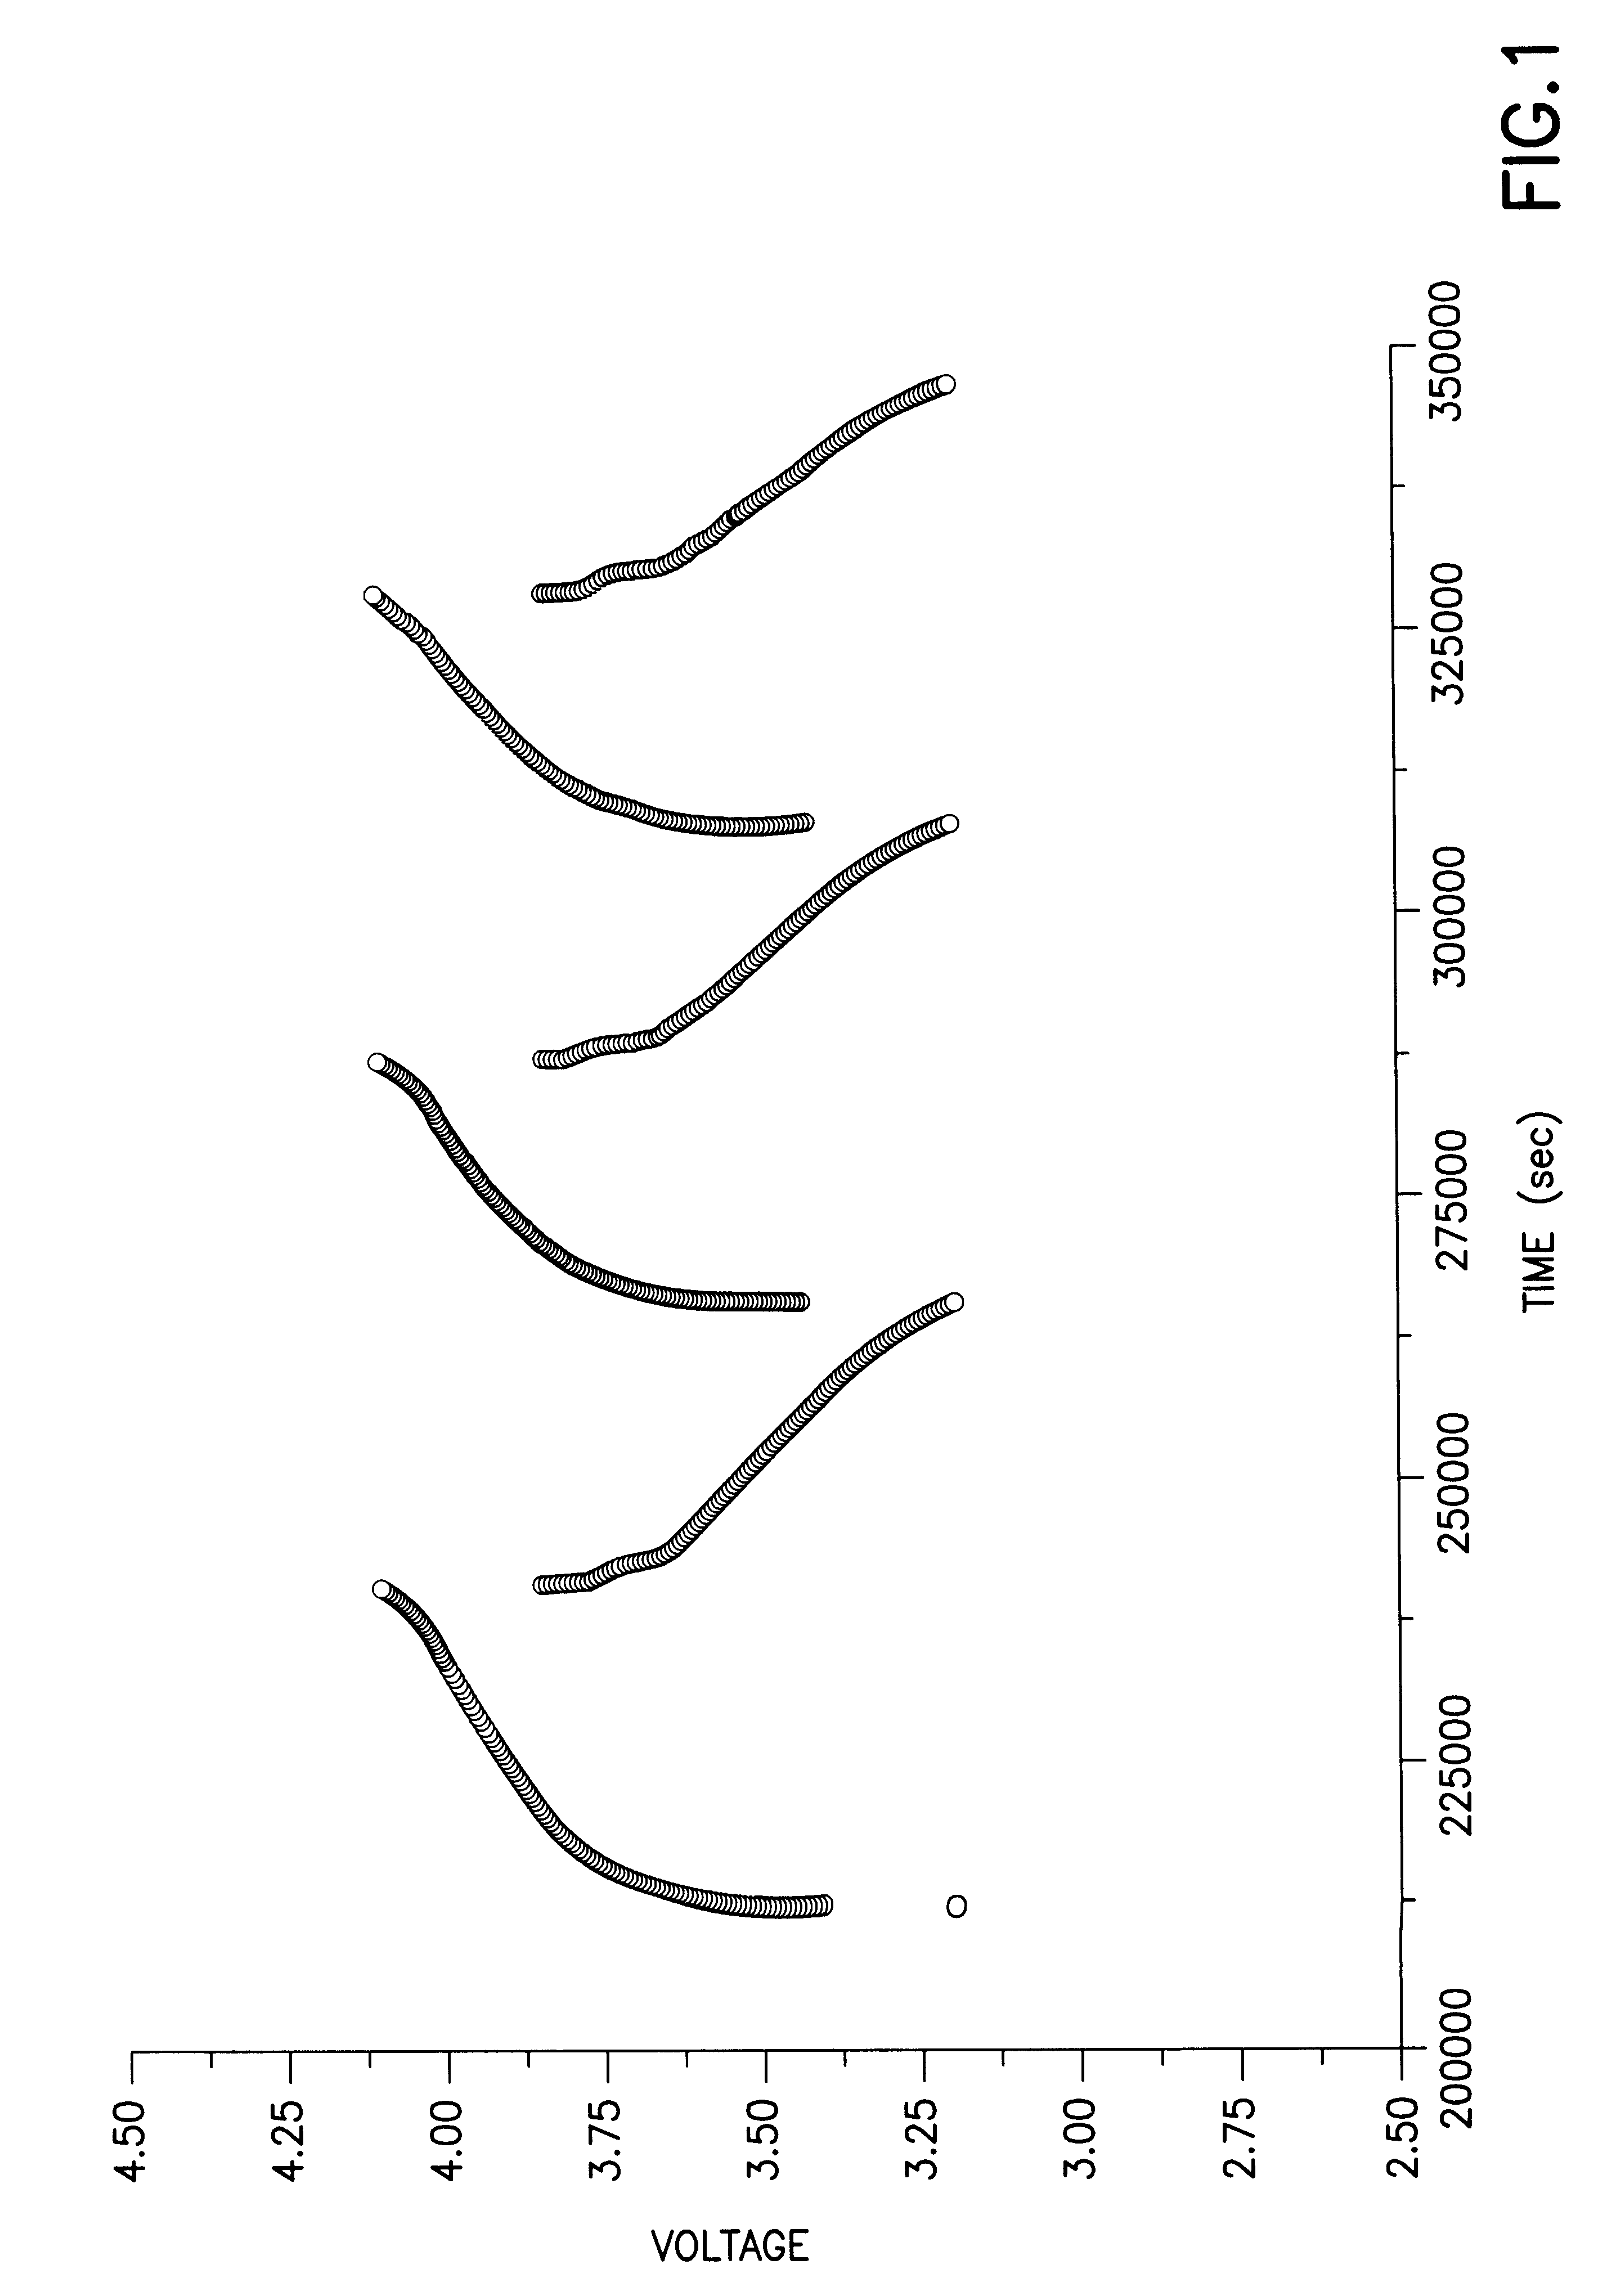 Solid electrolyte for an electrochemical cell composed of an inorganic metal oxide network encapsulating a liquid electrolyte